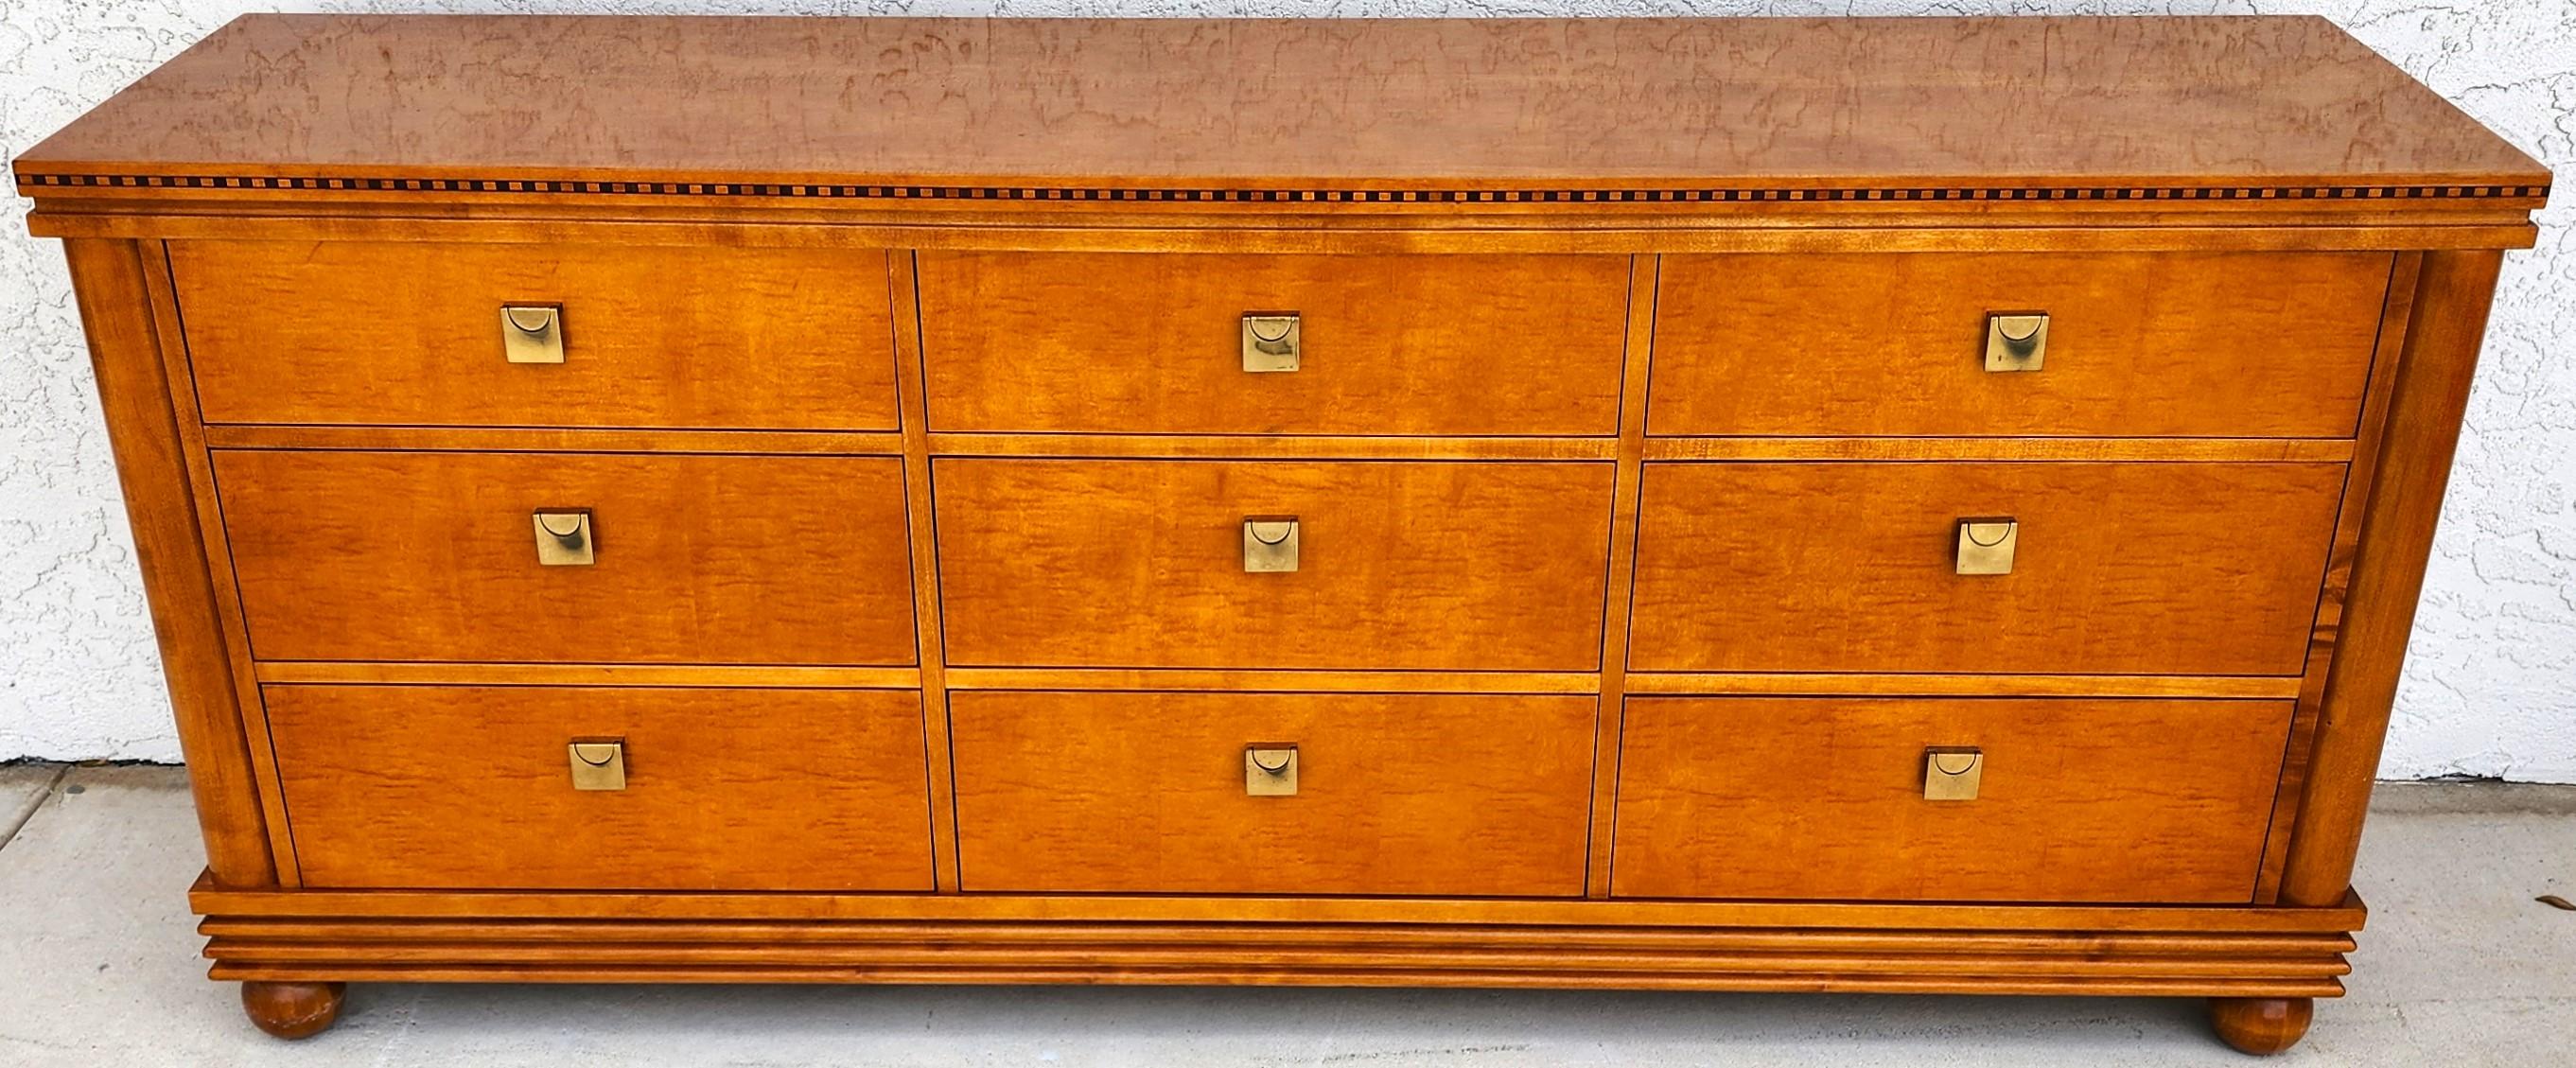 For FULL item description click on CONTINUE READING at the bottom of this page.

Offering One Of Our Recent Palm Beach Estate Fine Furniture Acquisitions Of A
High-Quality American Made Hickory White 'Genesis' Collection Biedermeier Style Satinwood